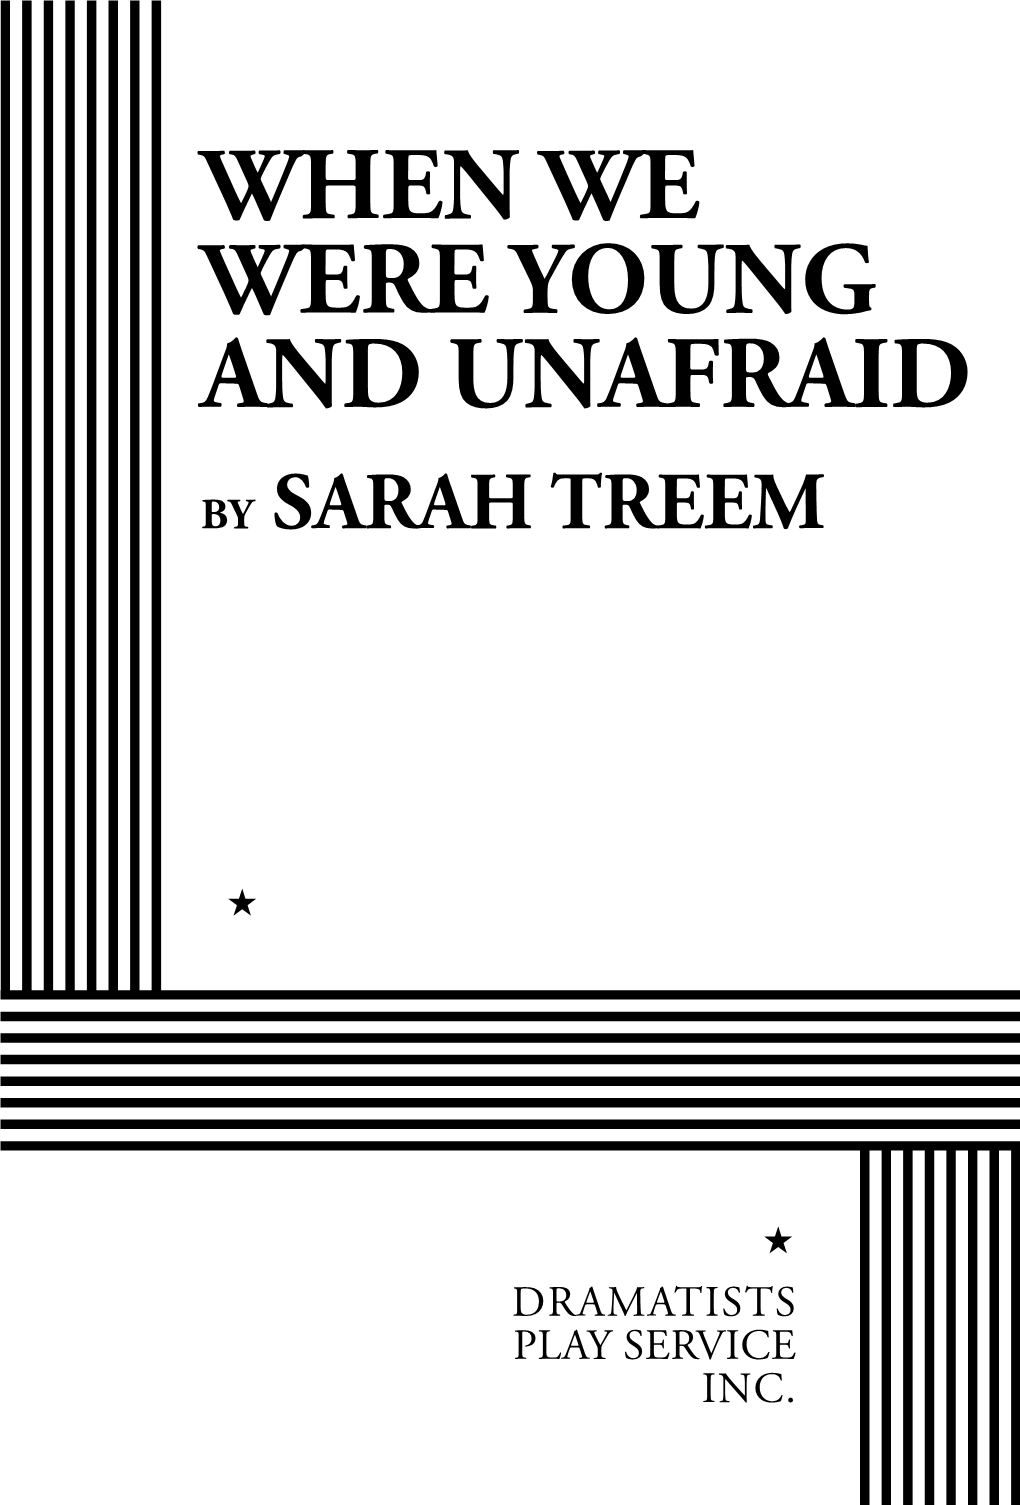 WHEN WE WERE YOUNG and UNAFRAID by Sarah Treem